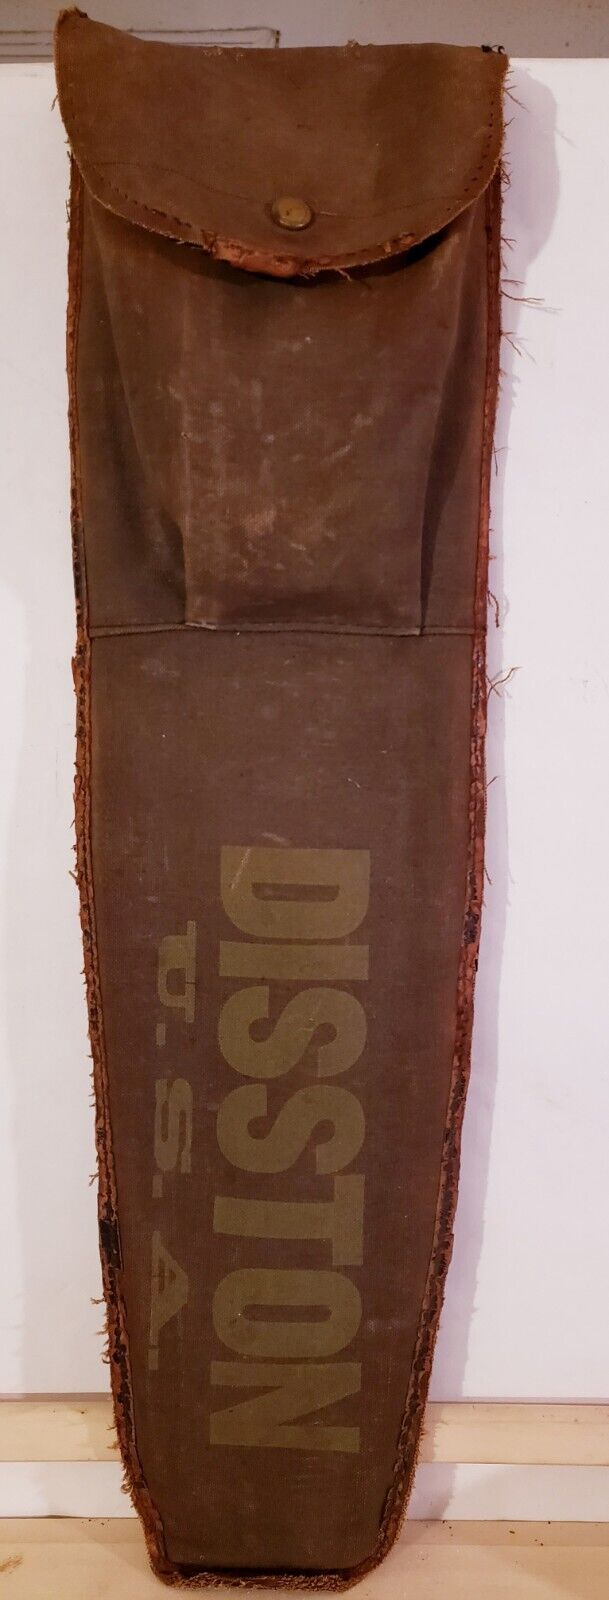 henry disston & Sons saw Kit 3 Blades Military Type Pouch Rare